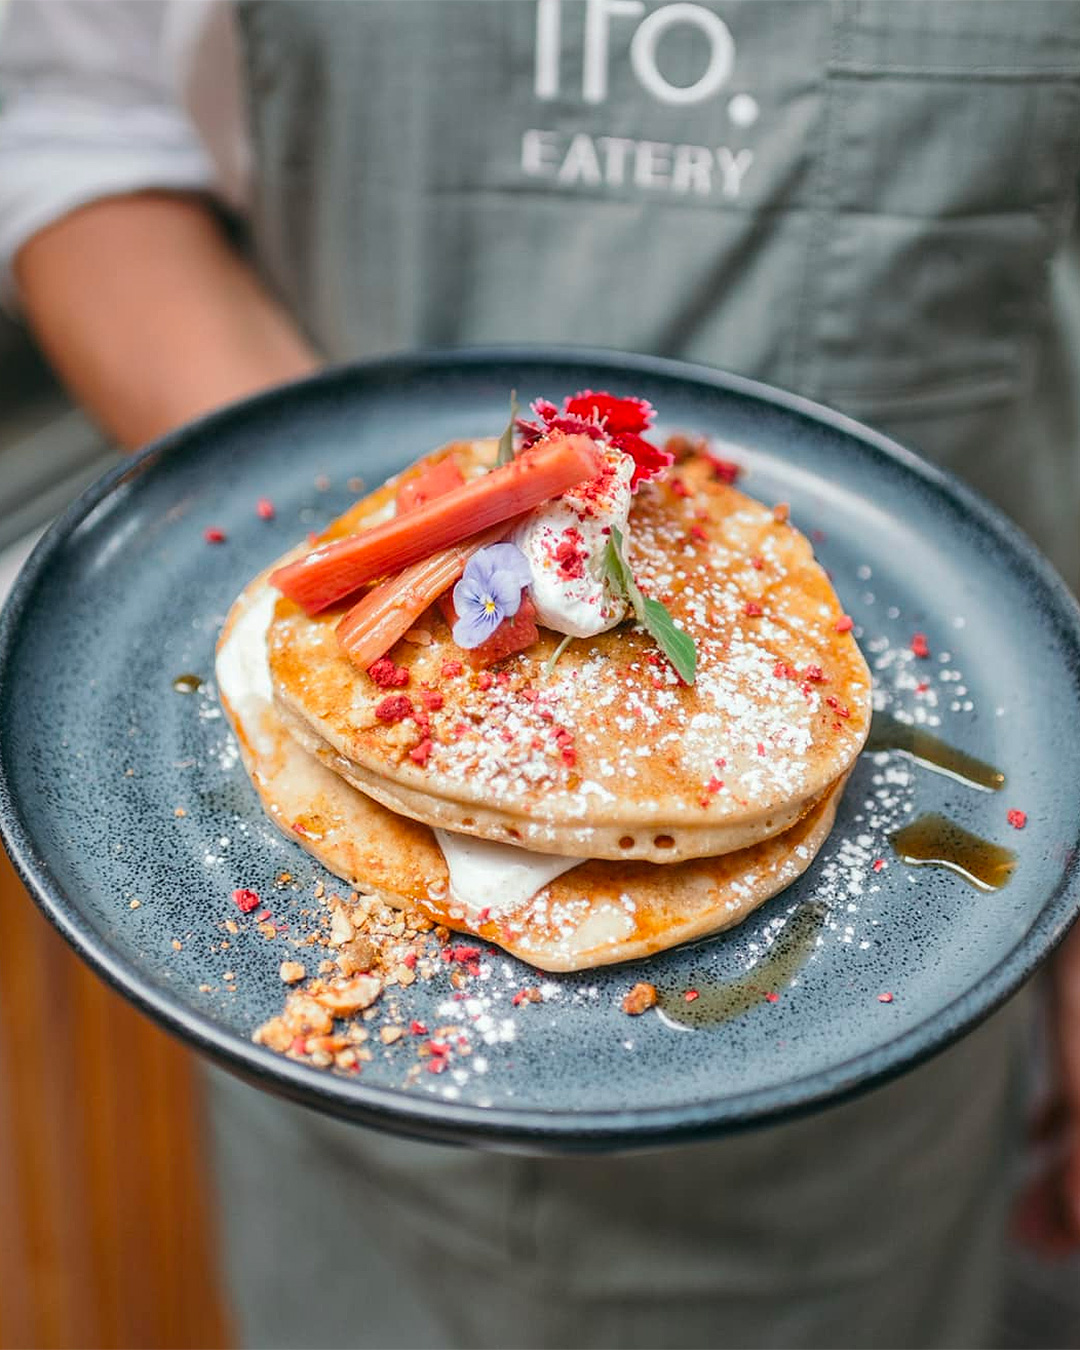 Someone holds a plate of fluffy pancakes at Akito Eatery in Waiheke.